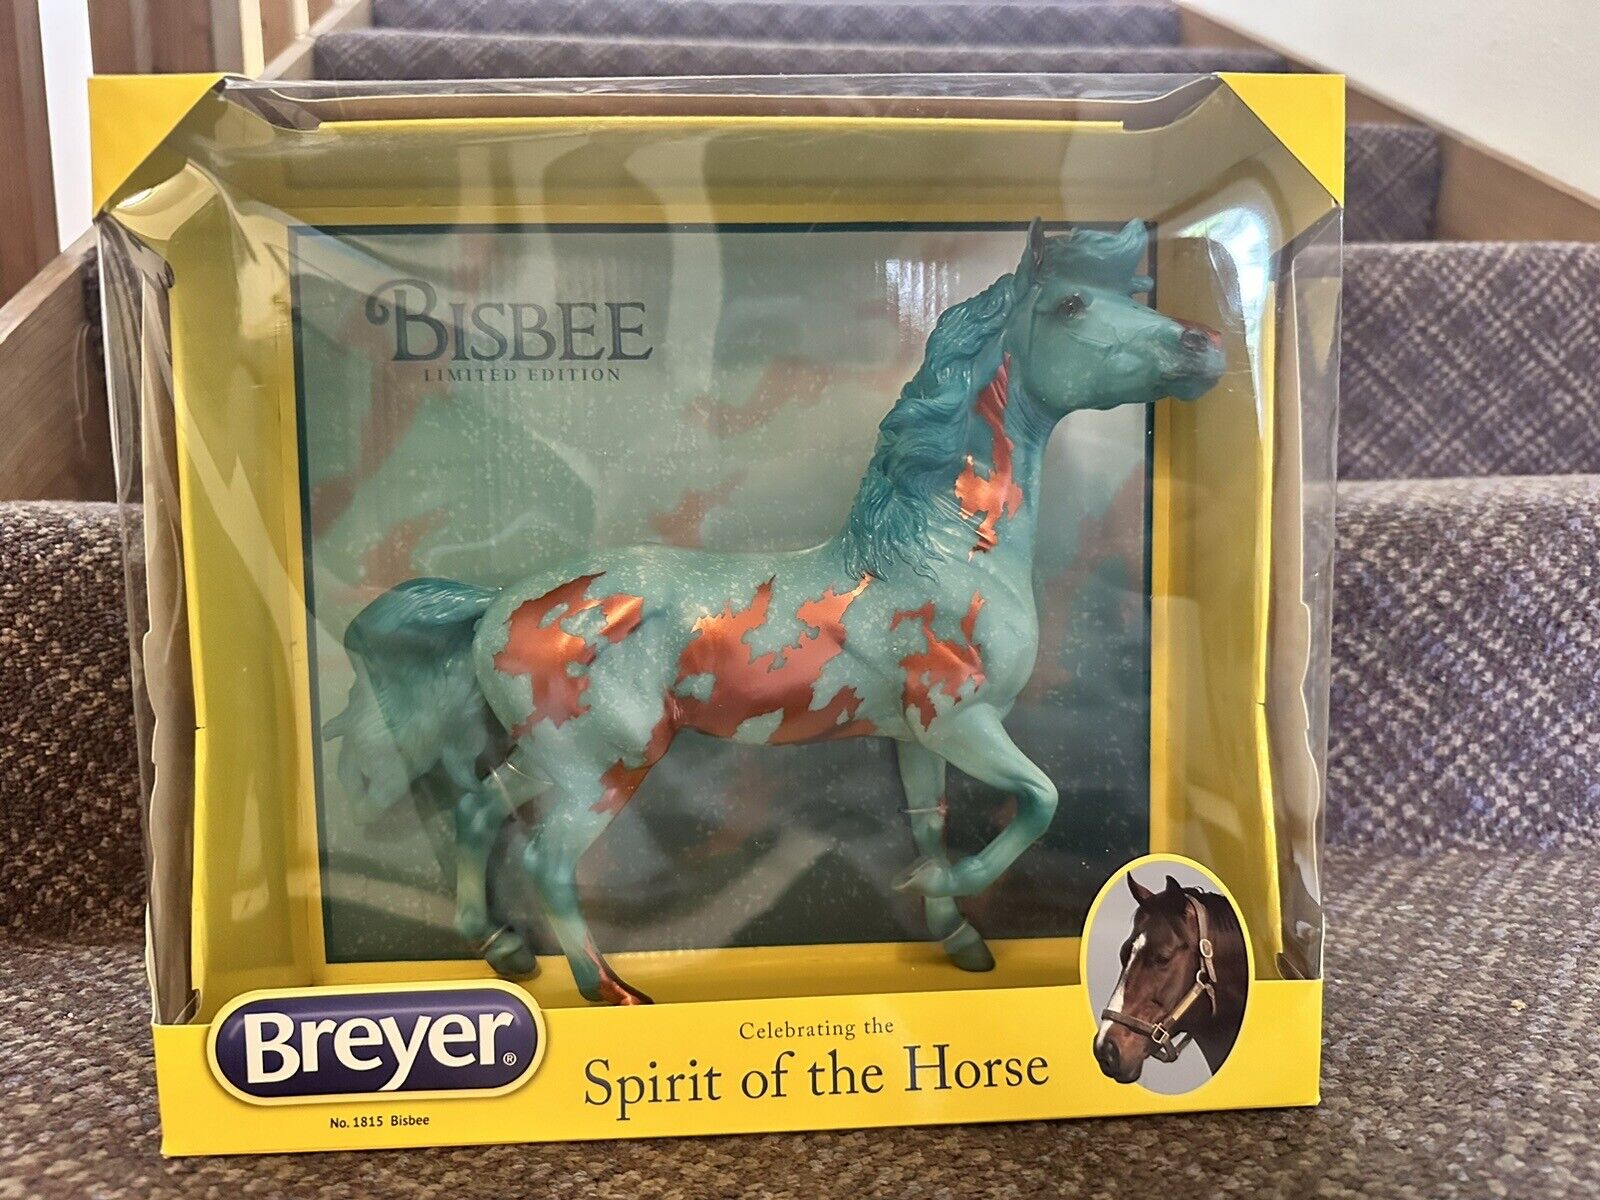 BREYER Bisbee #1815 Limited Edition Special Run turquoise mustang hwin mold